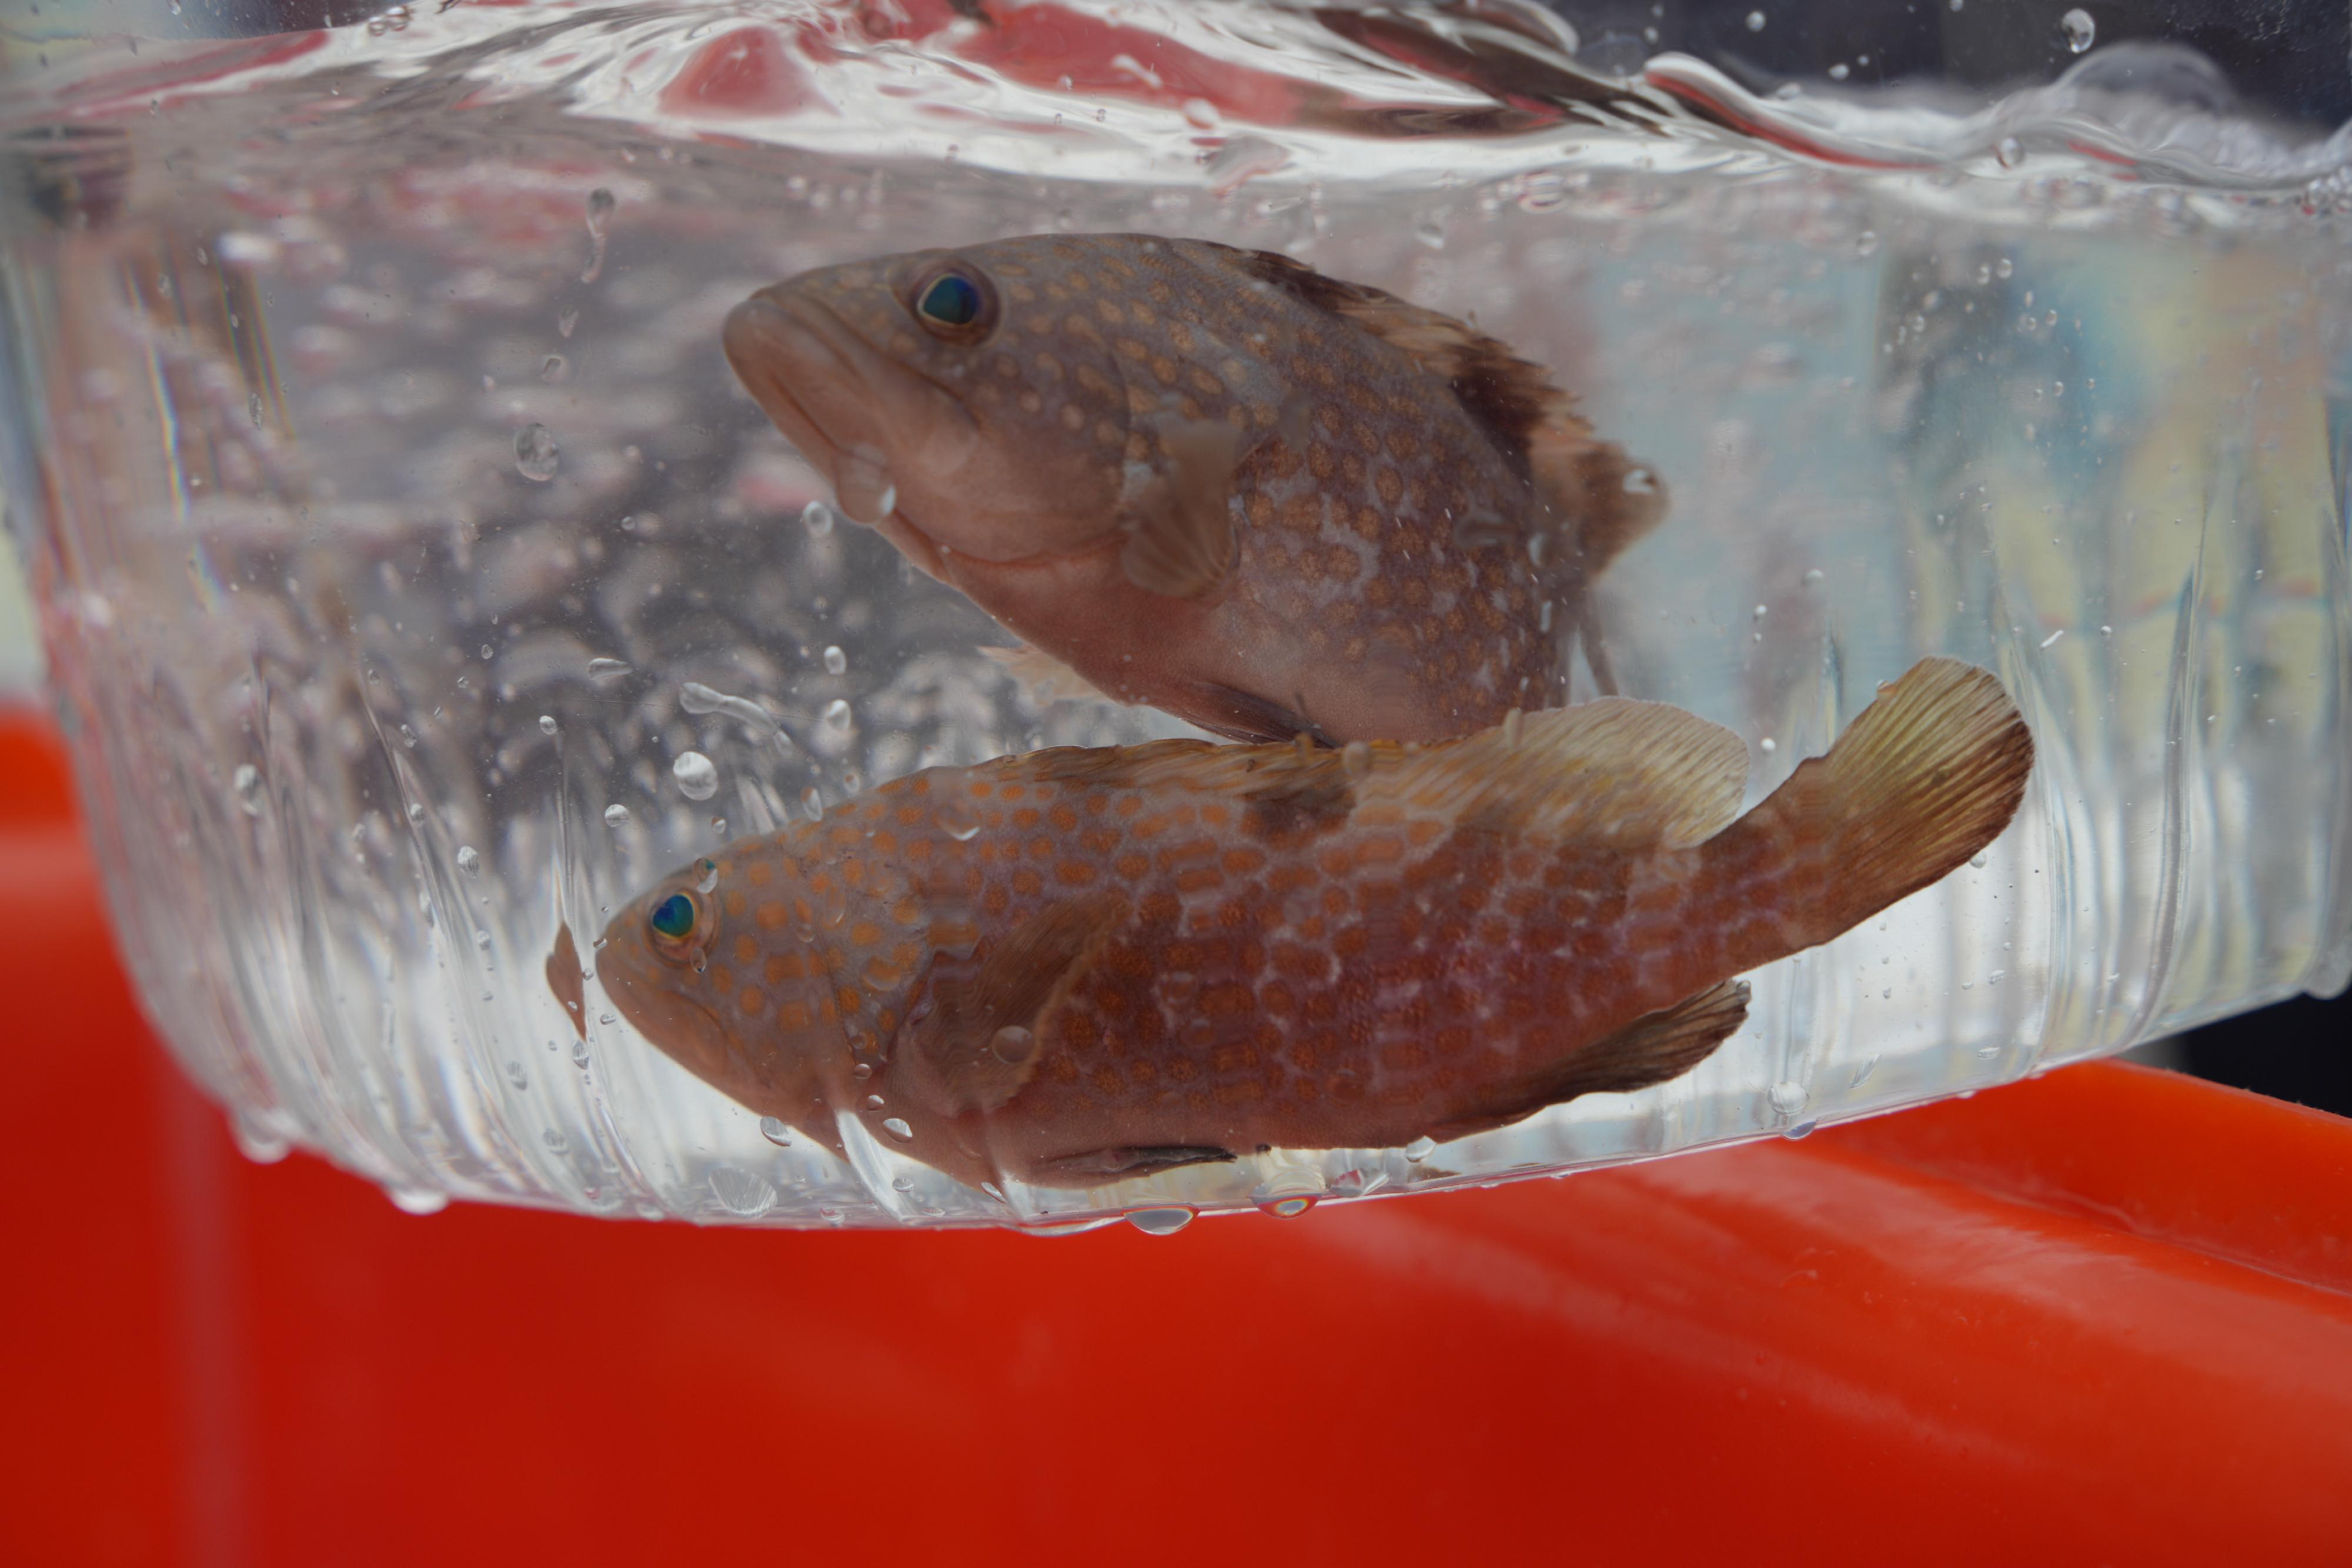 The Agriculture, Fisheries and Conservation Department launched a fish-restocking exercise today (June 6), the designated National Fish Releasing Day. Photo shows Hong Kong grouper (Epinephelus akaara) fingerlings for release.